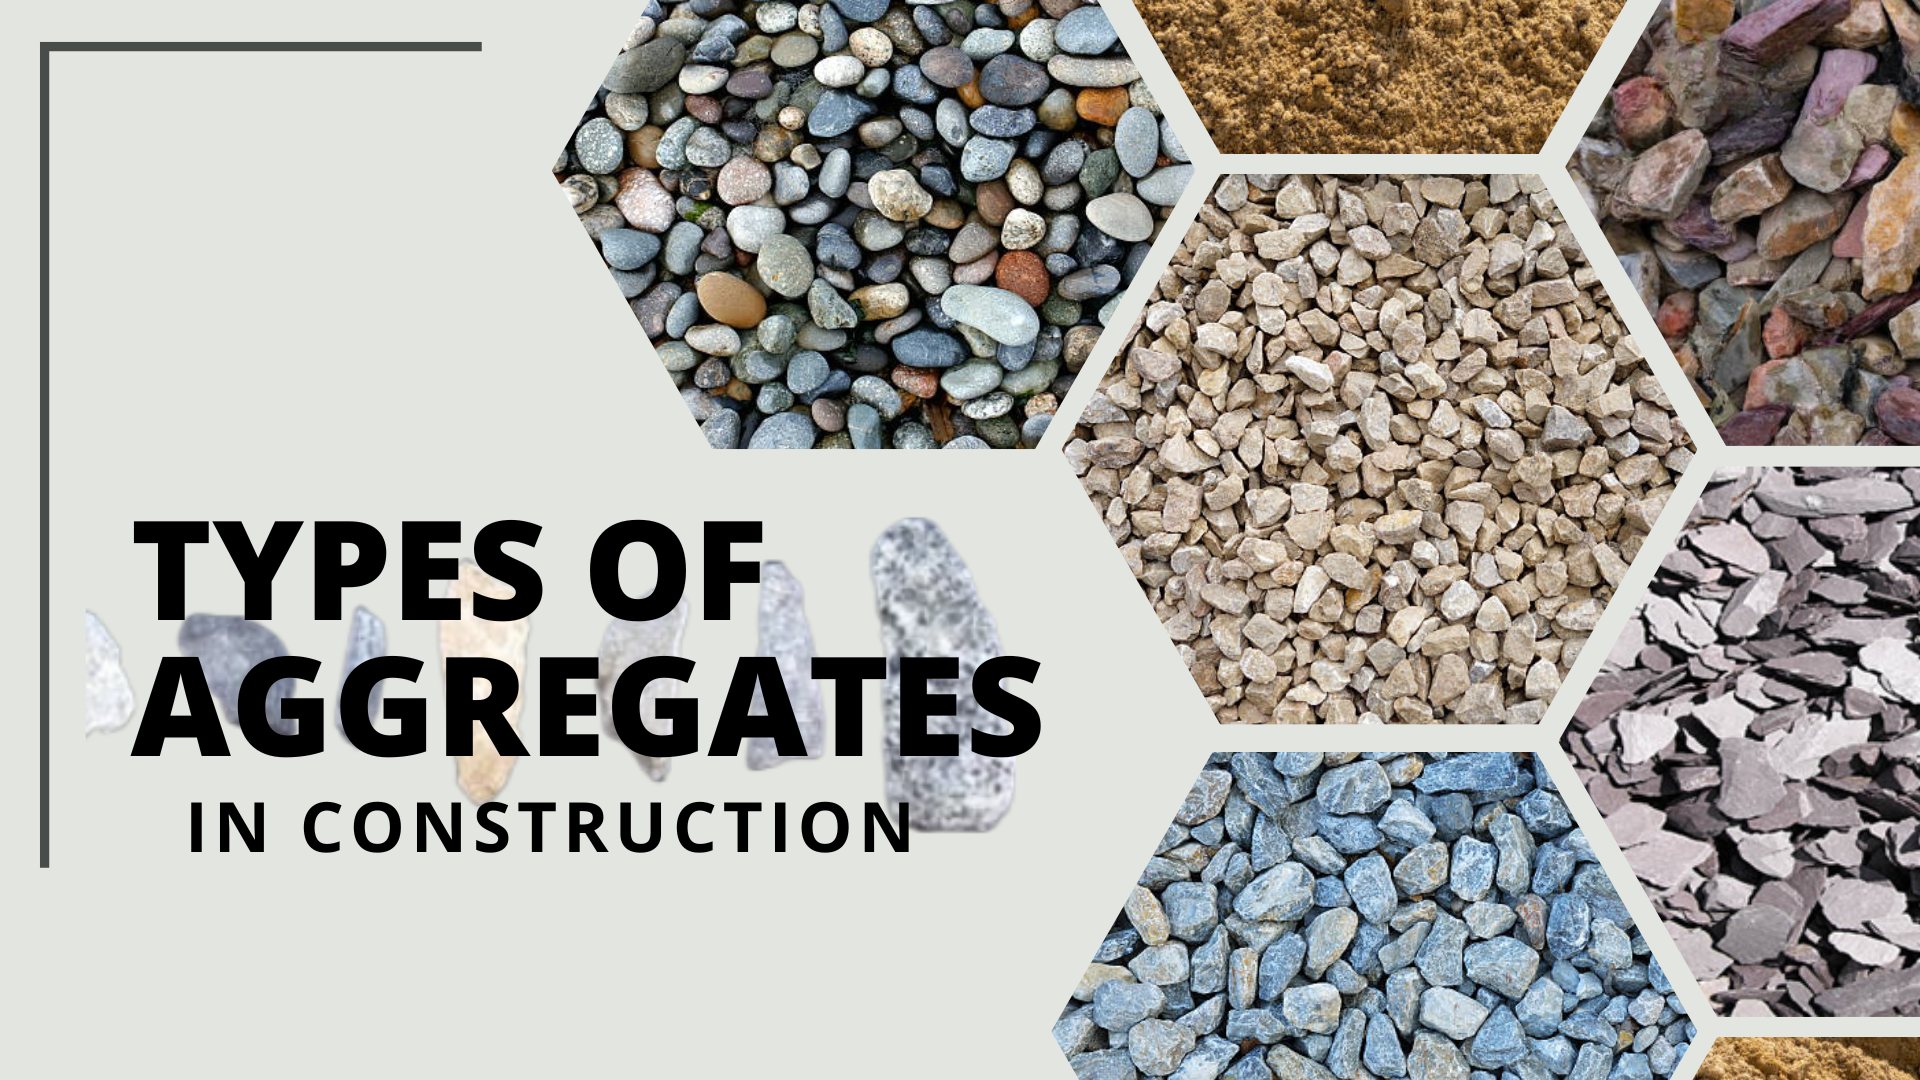 Types of Aggregates